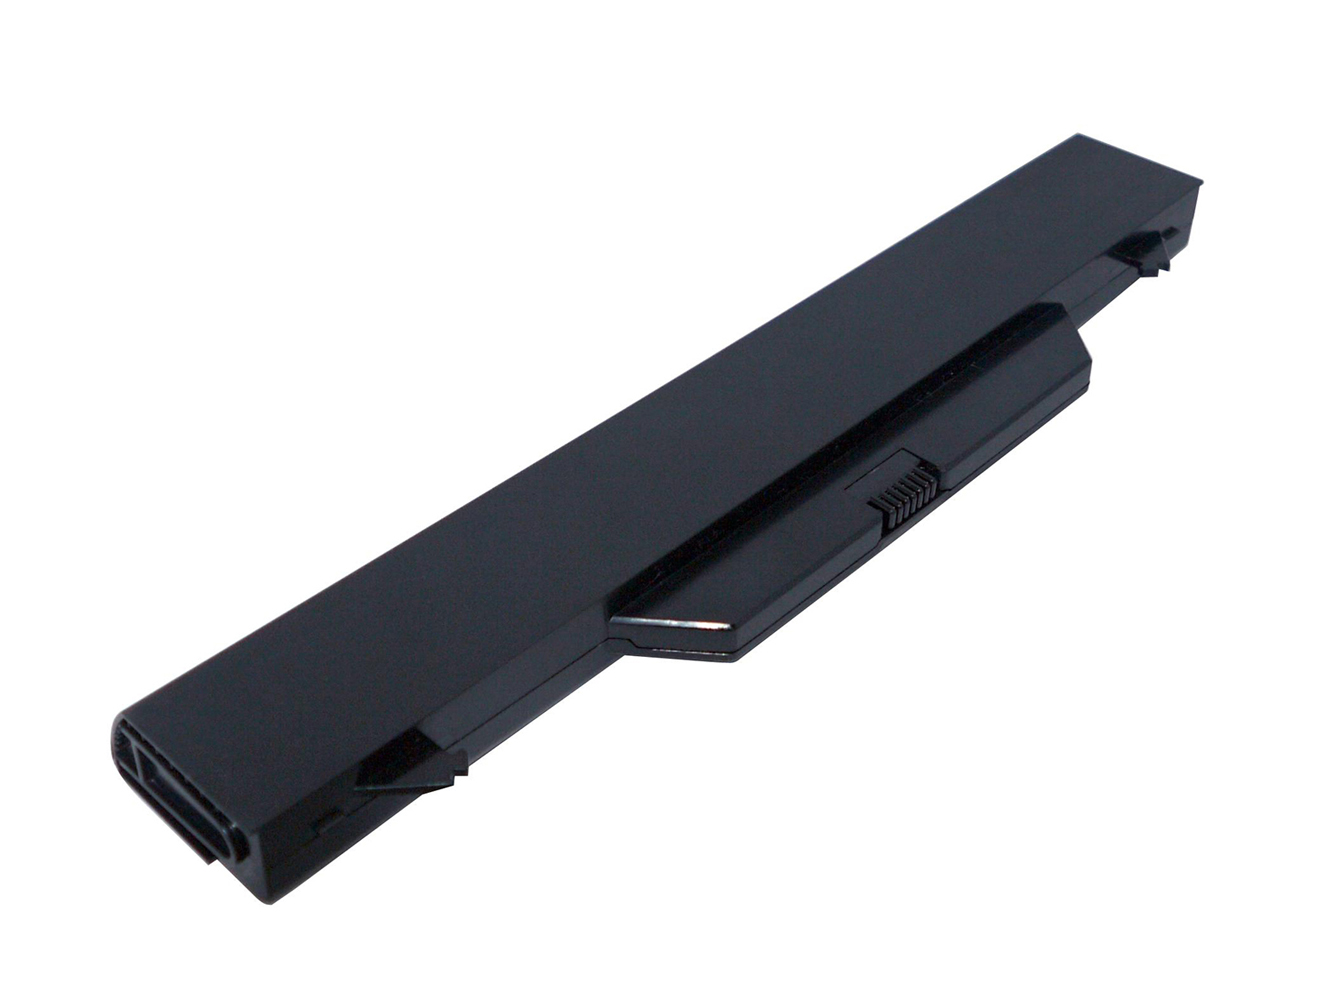 513130-321, 535753-001 replacement Laptop Battery for HP ProBook 4510s, ProBook 4510s/CT, 4600mAh, 14.40V